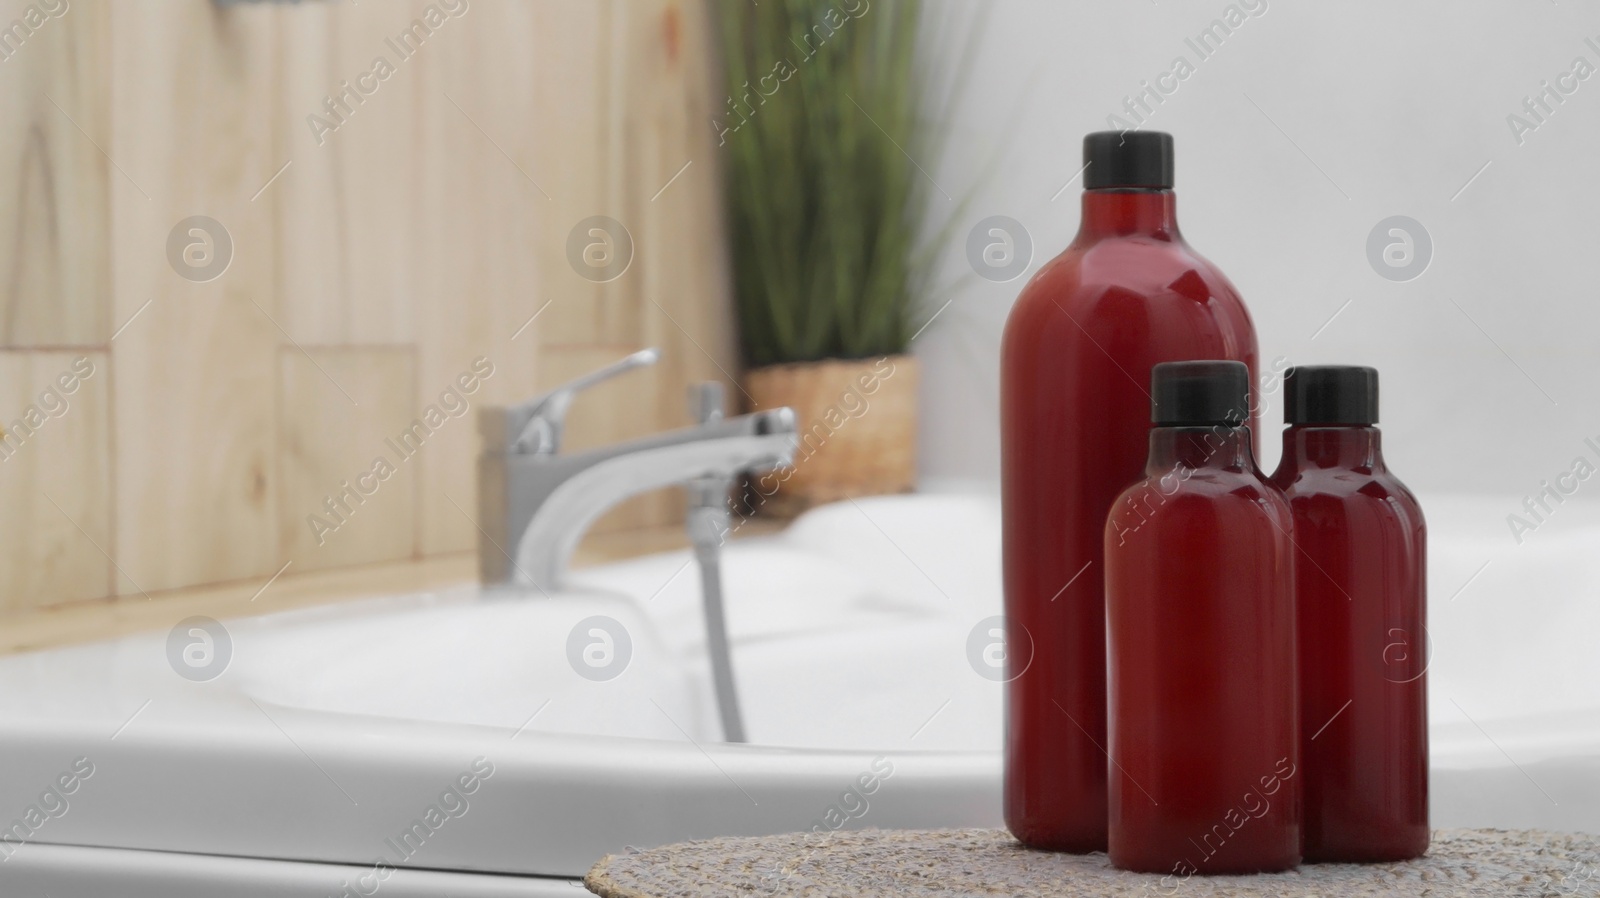 Photo of Bath foam and other personal hygiene products in bottles on wicker mat in bathroom, space for text